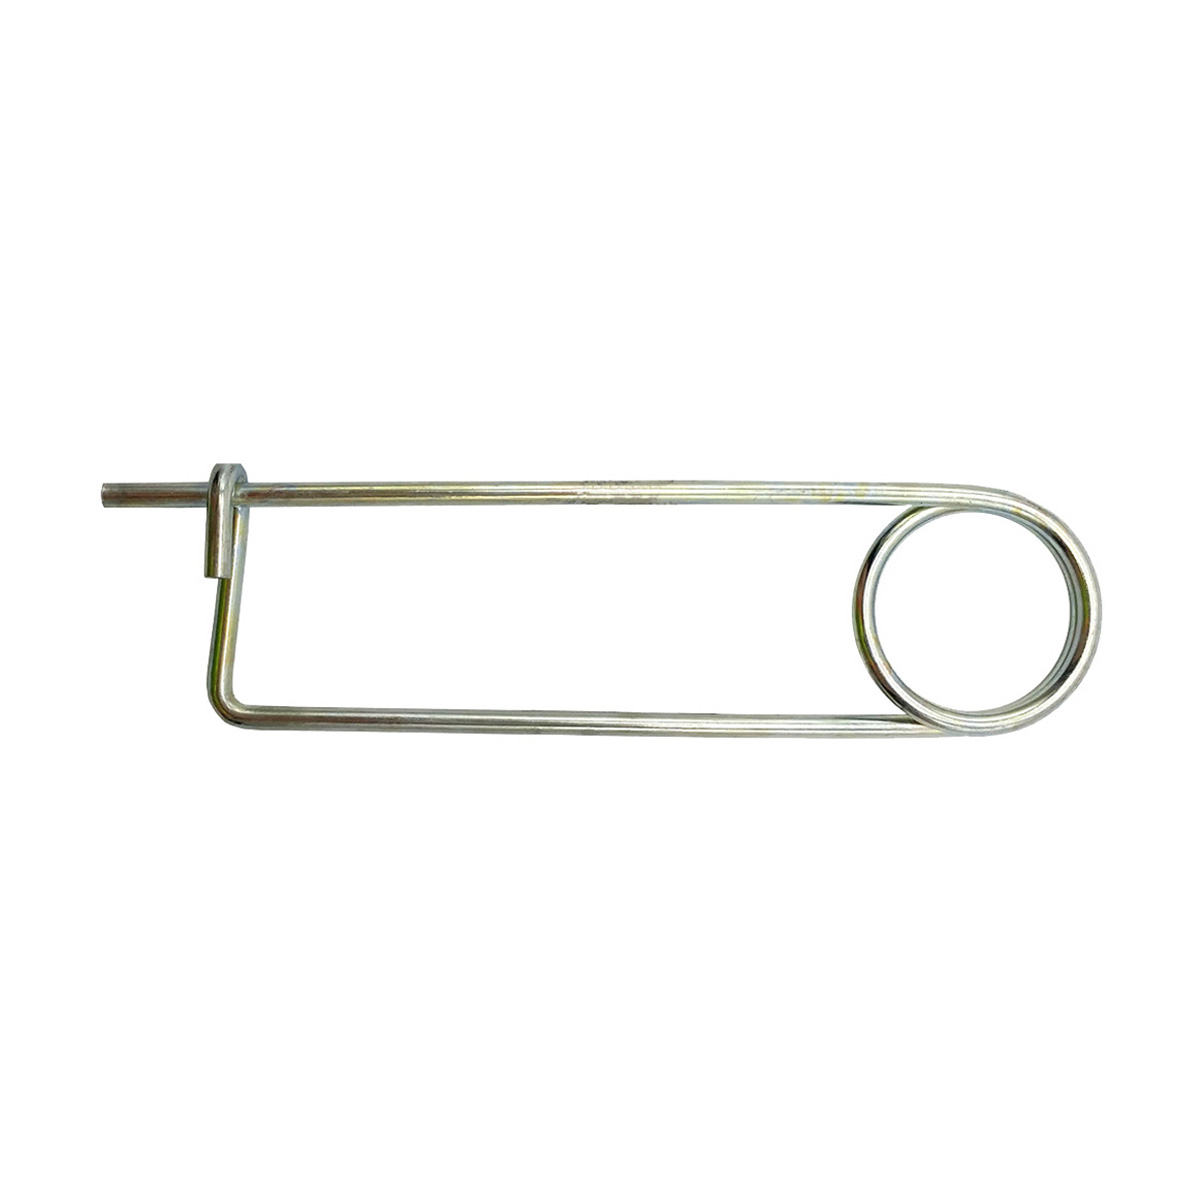 Safety Pin - 3/16-in